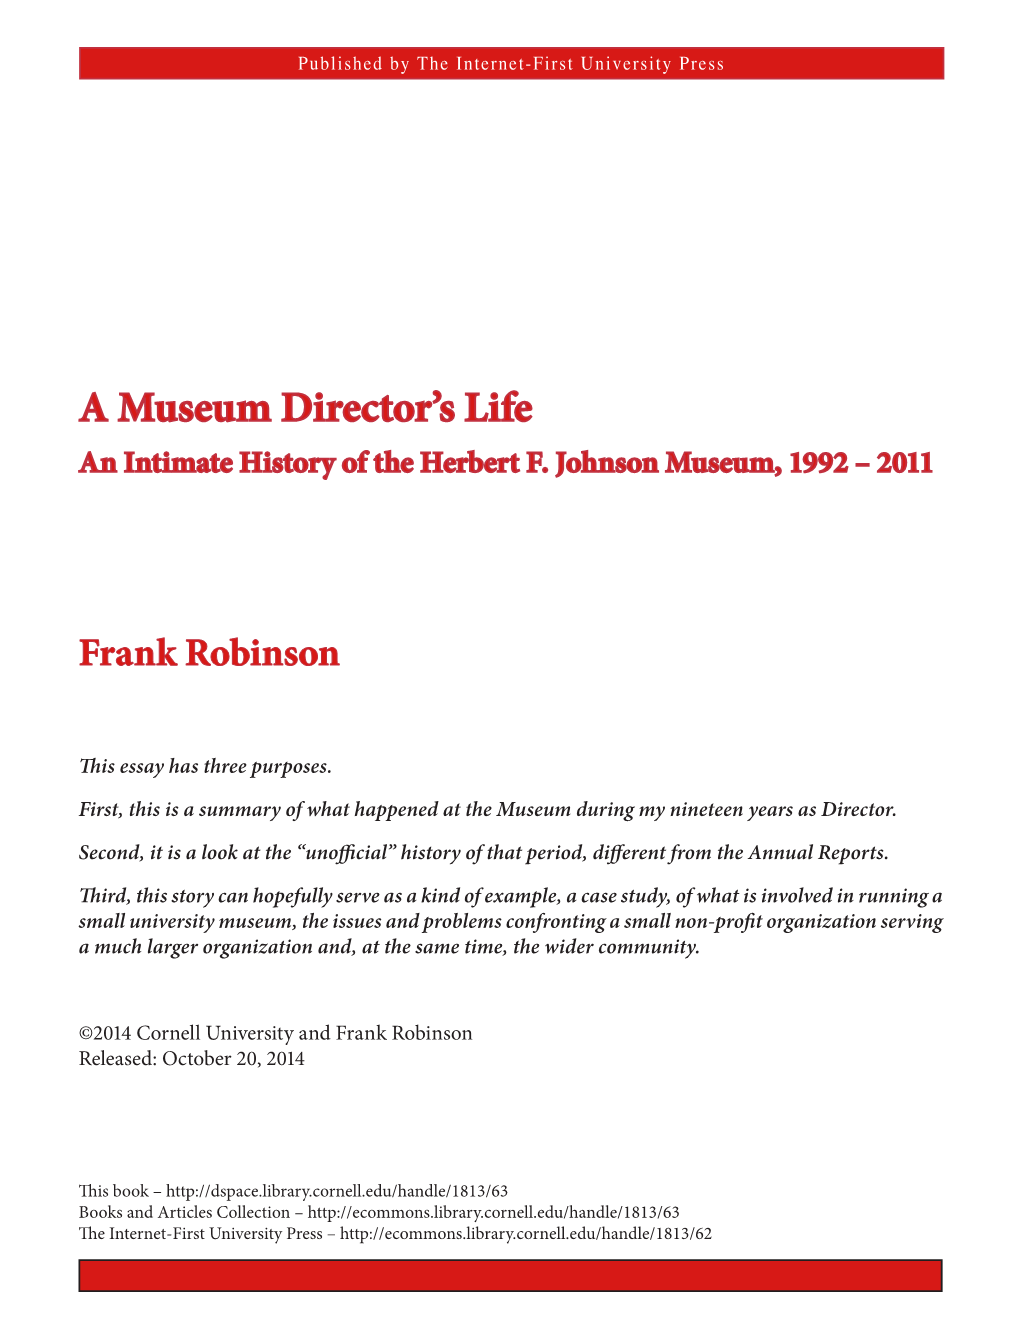 A Museum Director's Life